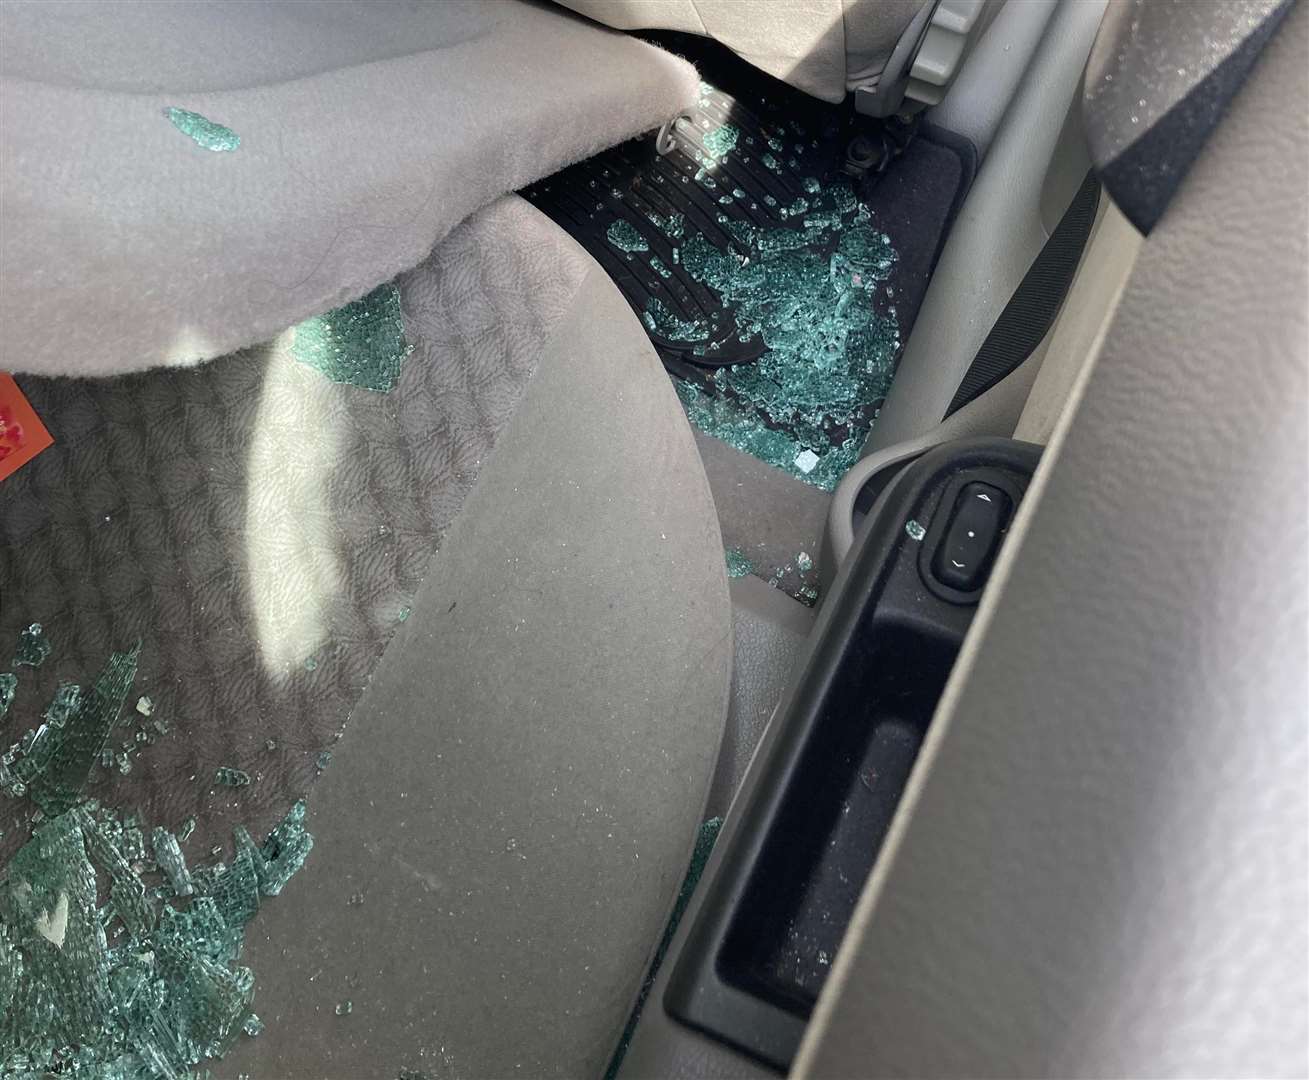 The car was broken into late last month